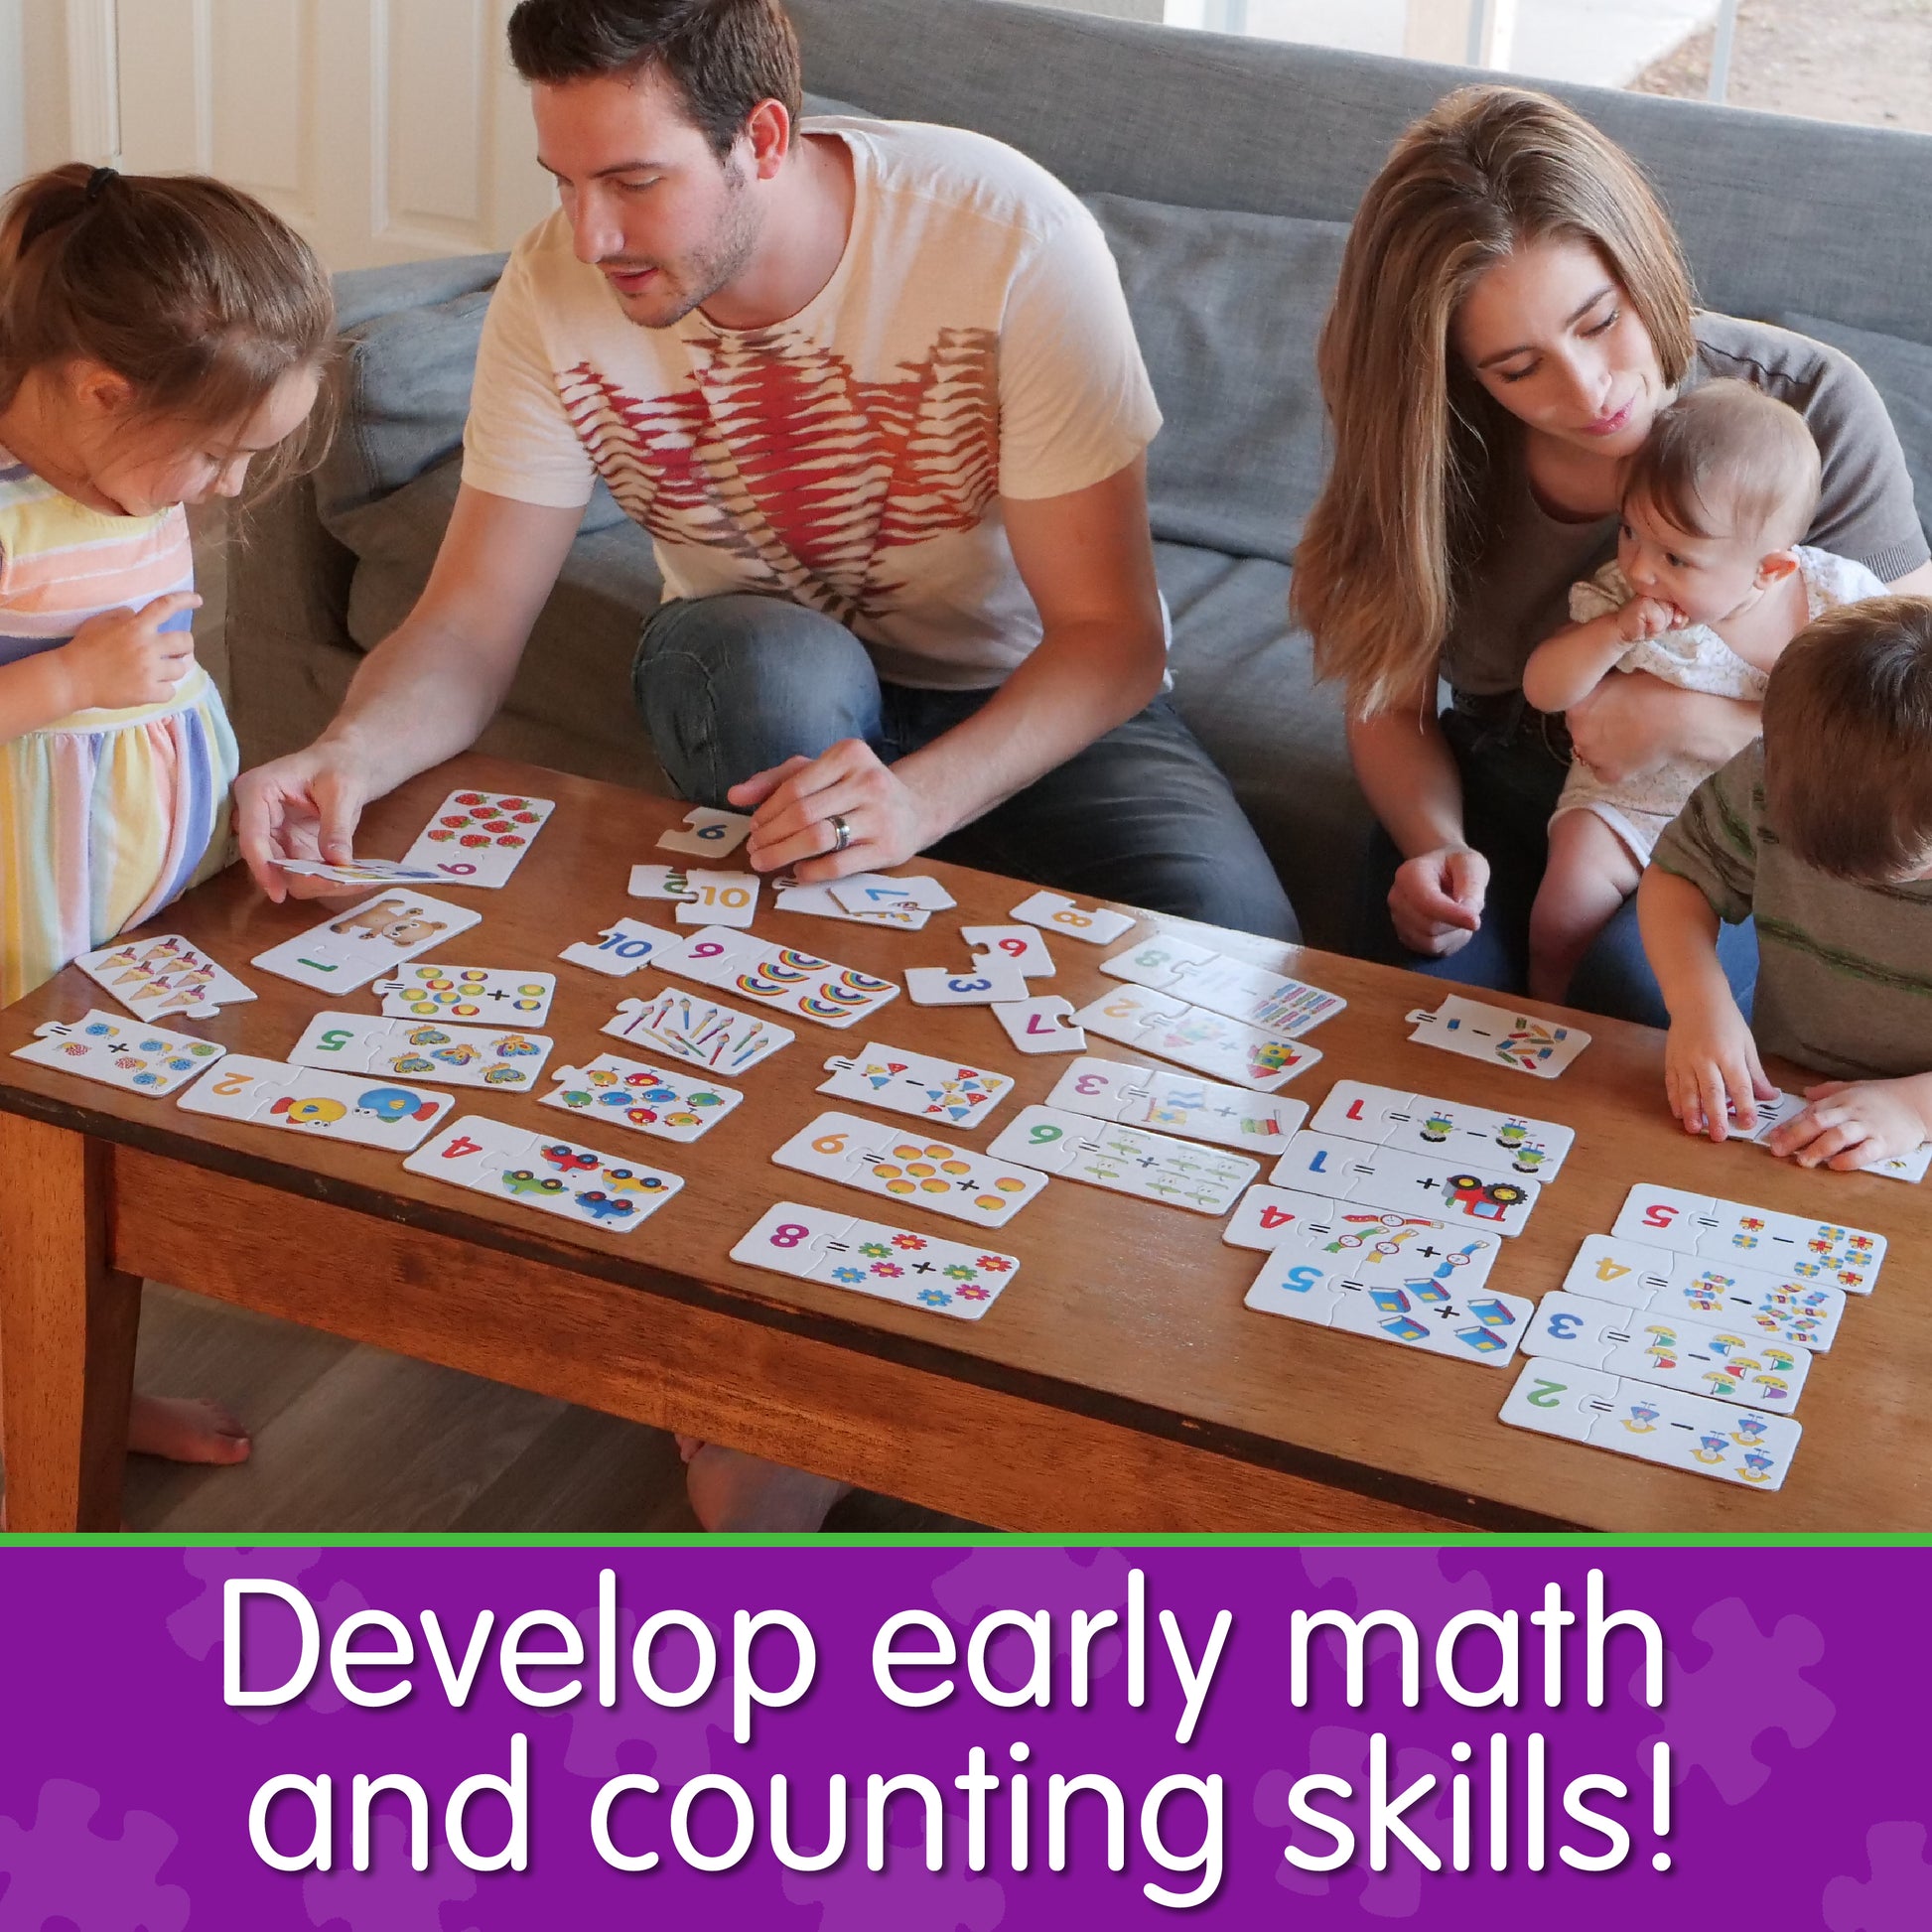 Infographic of family playing Match It - Mathematics together that says, "Develop early math and counting skills!"